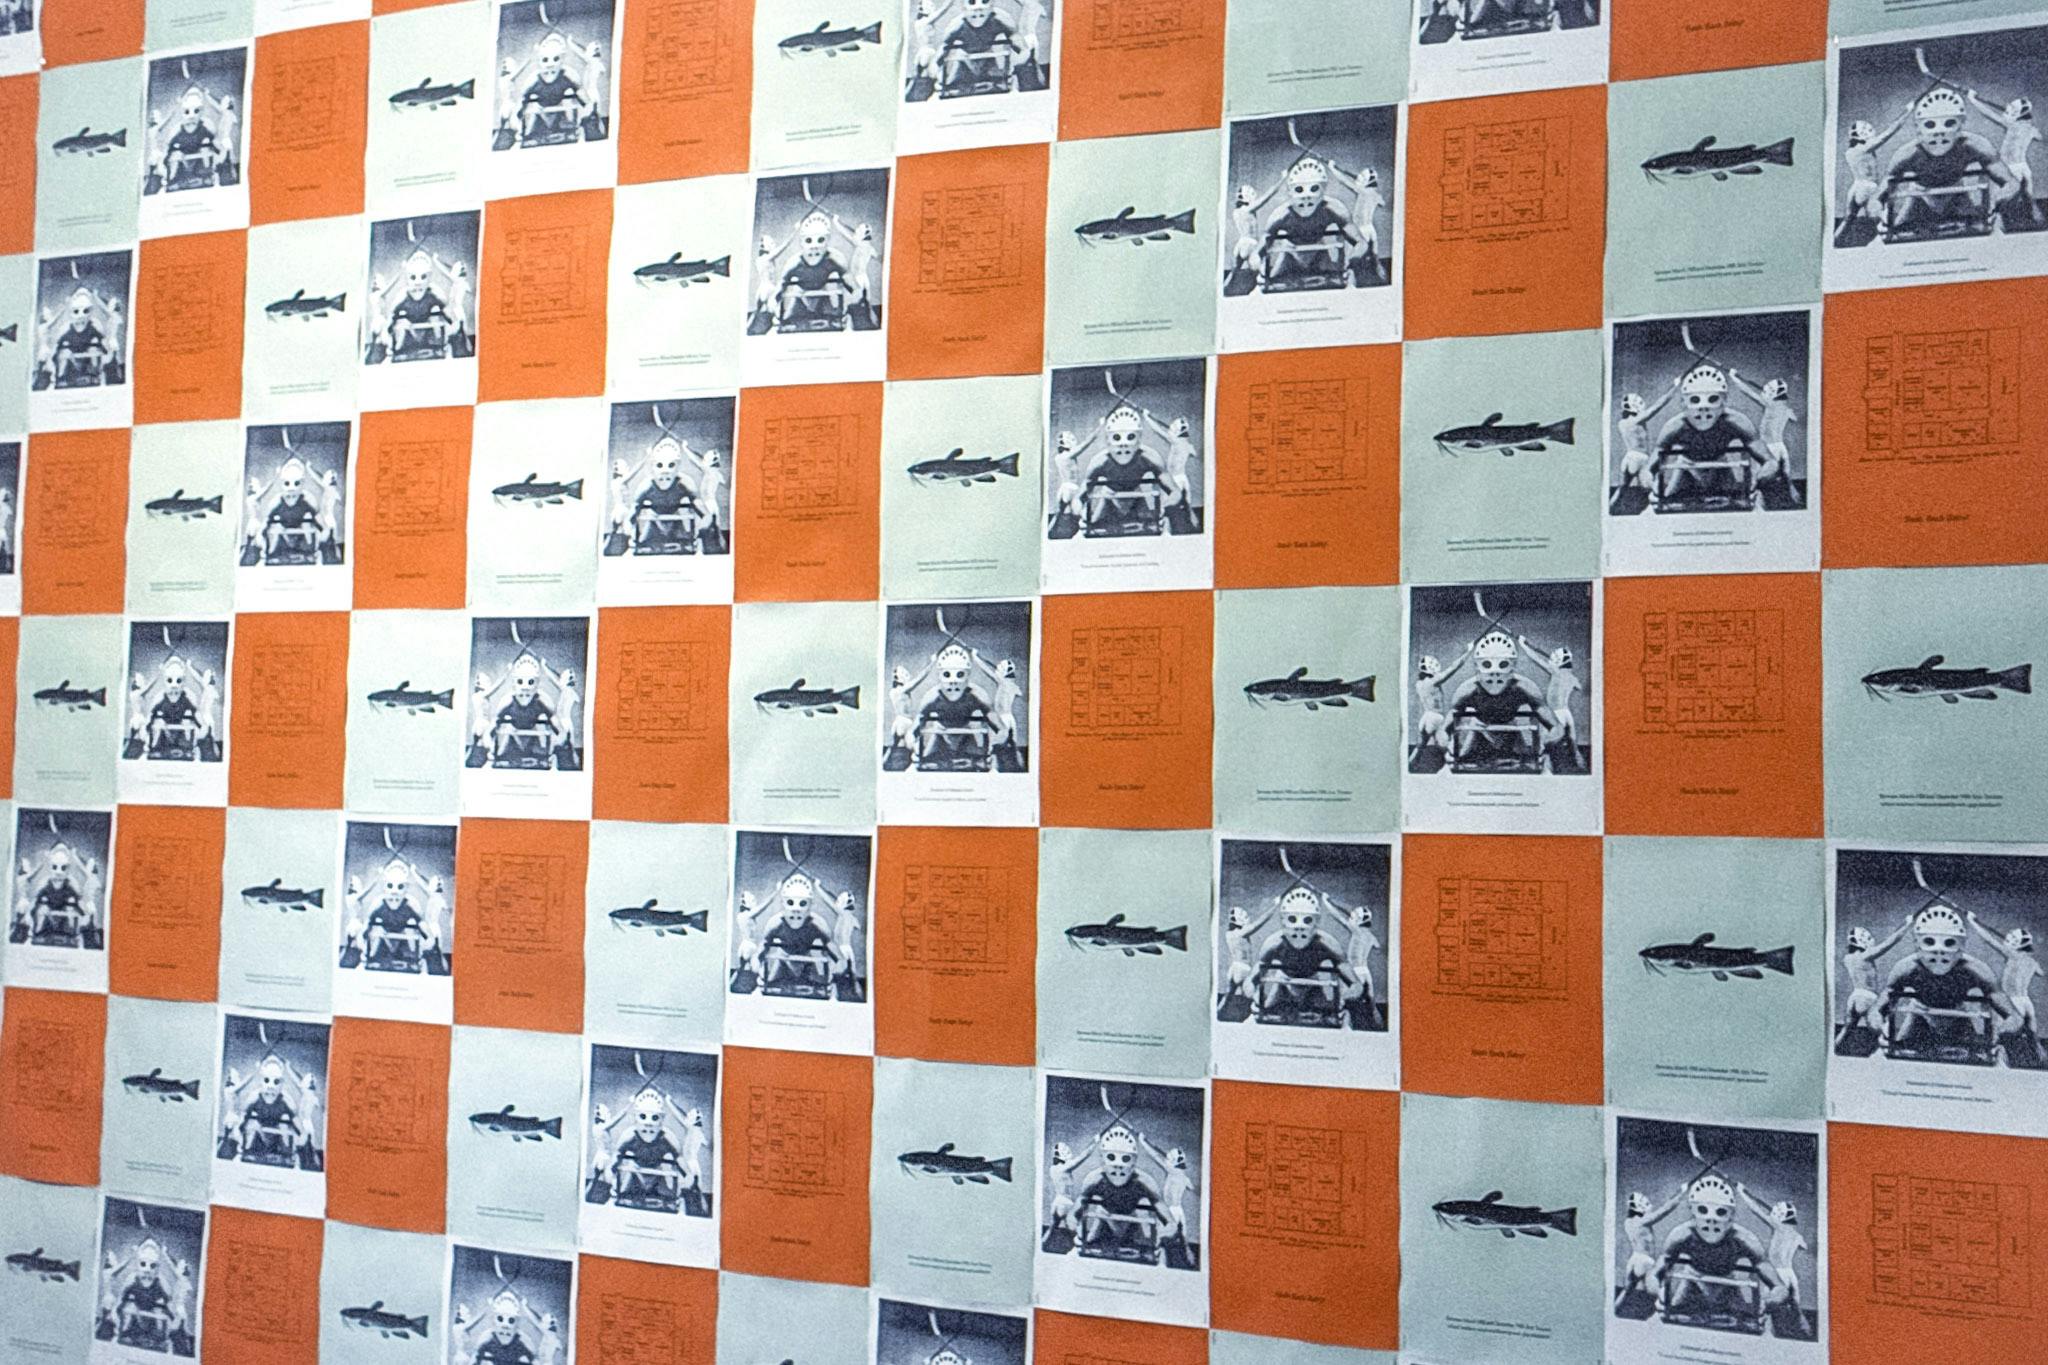 A gallery wall covered in 3 repeating images. One is a blueprint on orange paper, one is an illustration of a catfish on green paper and the other is a still from the film "The Making of the Monster."